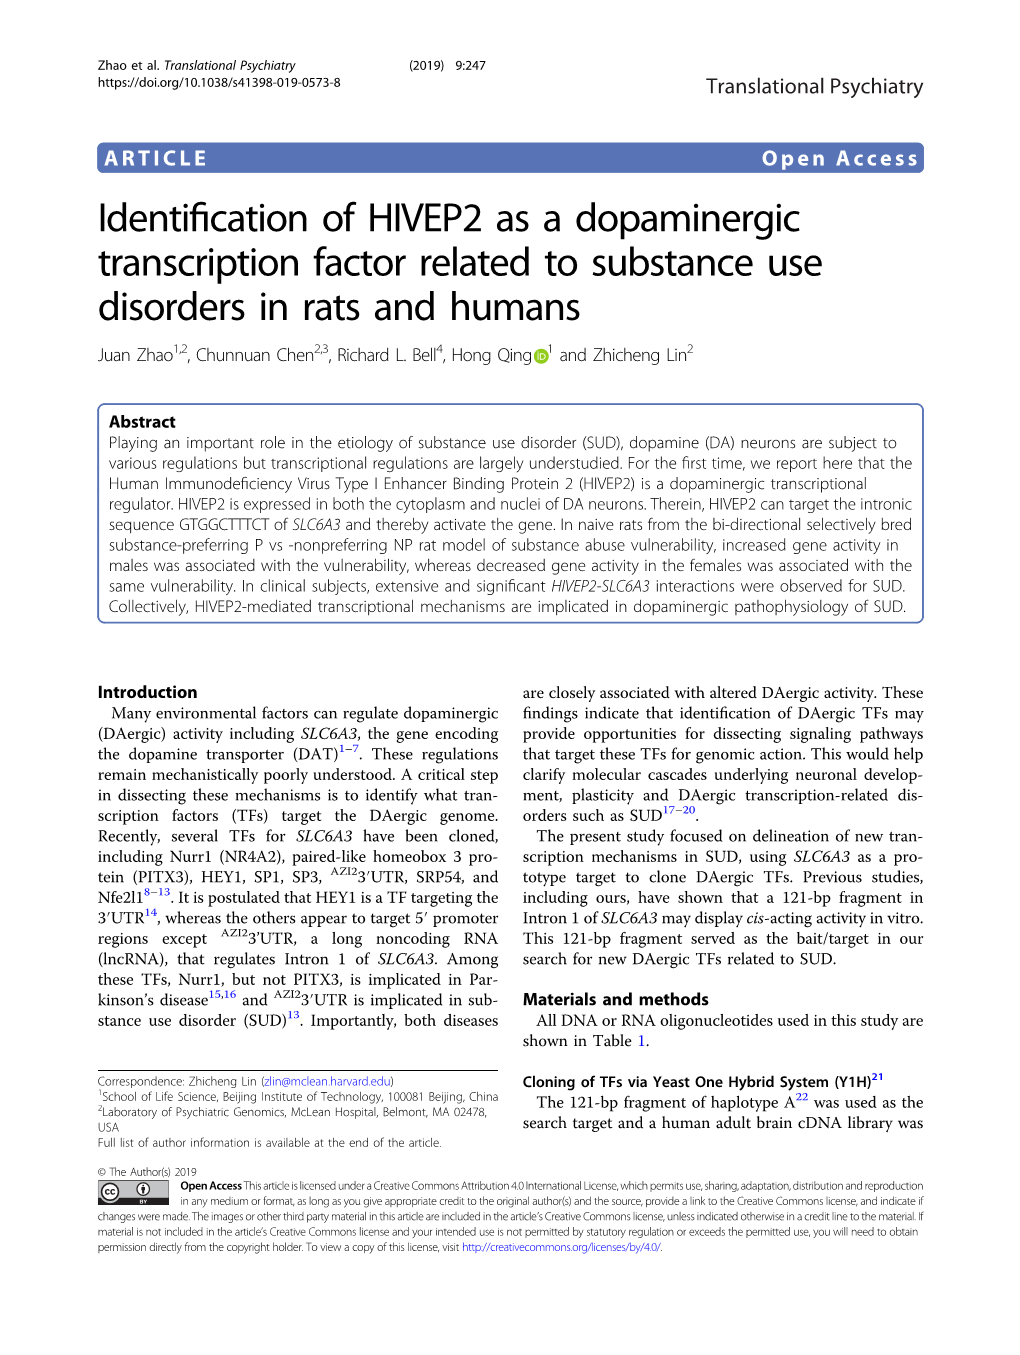 Identification of HIVEP2 As a Dopaminergic Transcription Factor